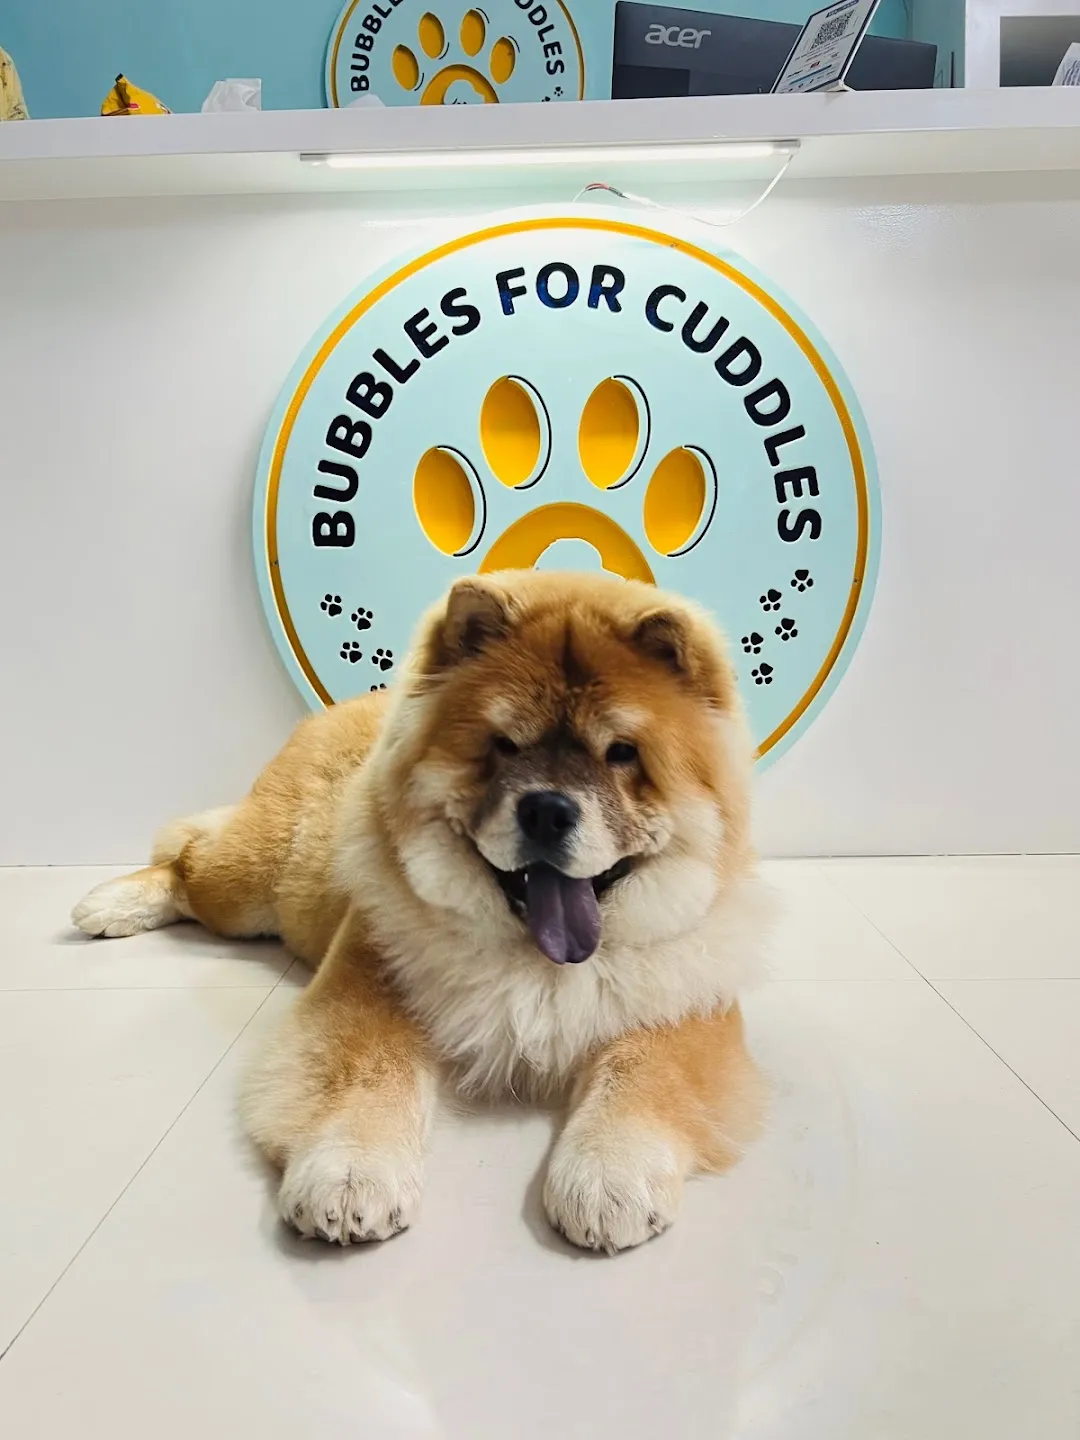 Bubbles Pet Spa in Malad West,Mumbai - Best Pet Grooming Services in Mumbai  - Justdial